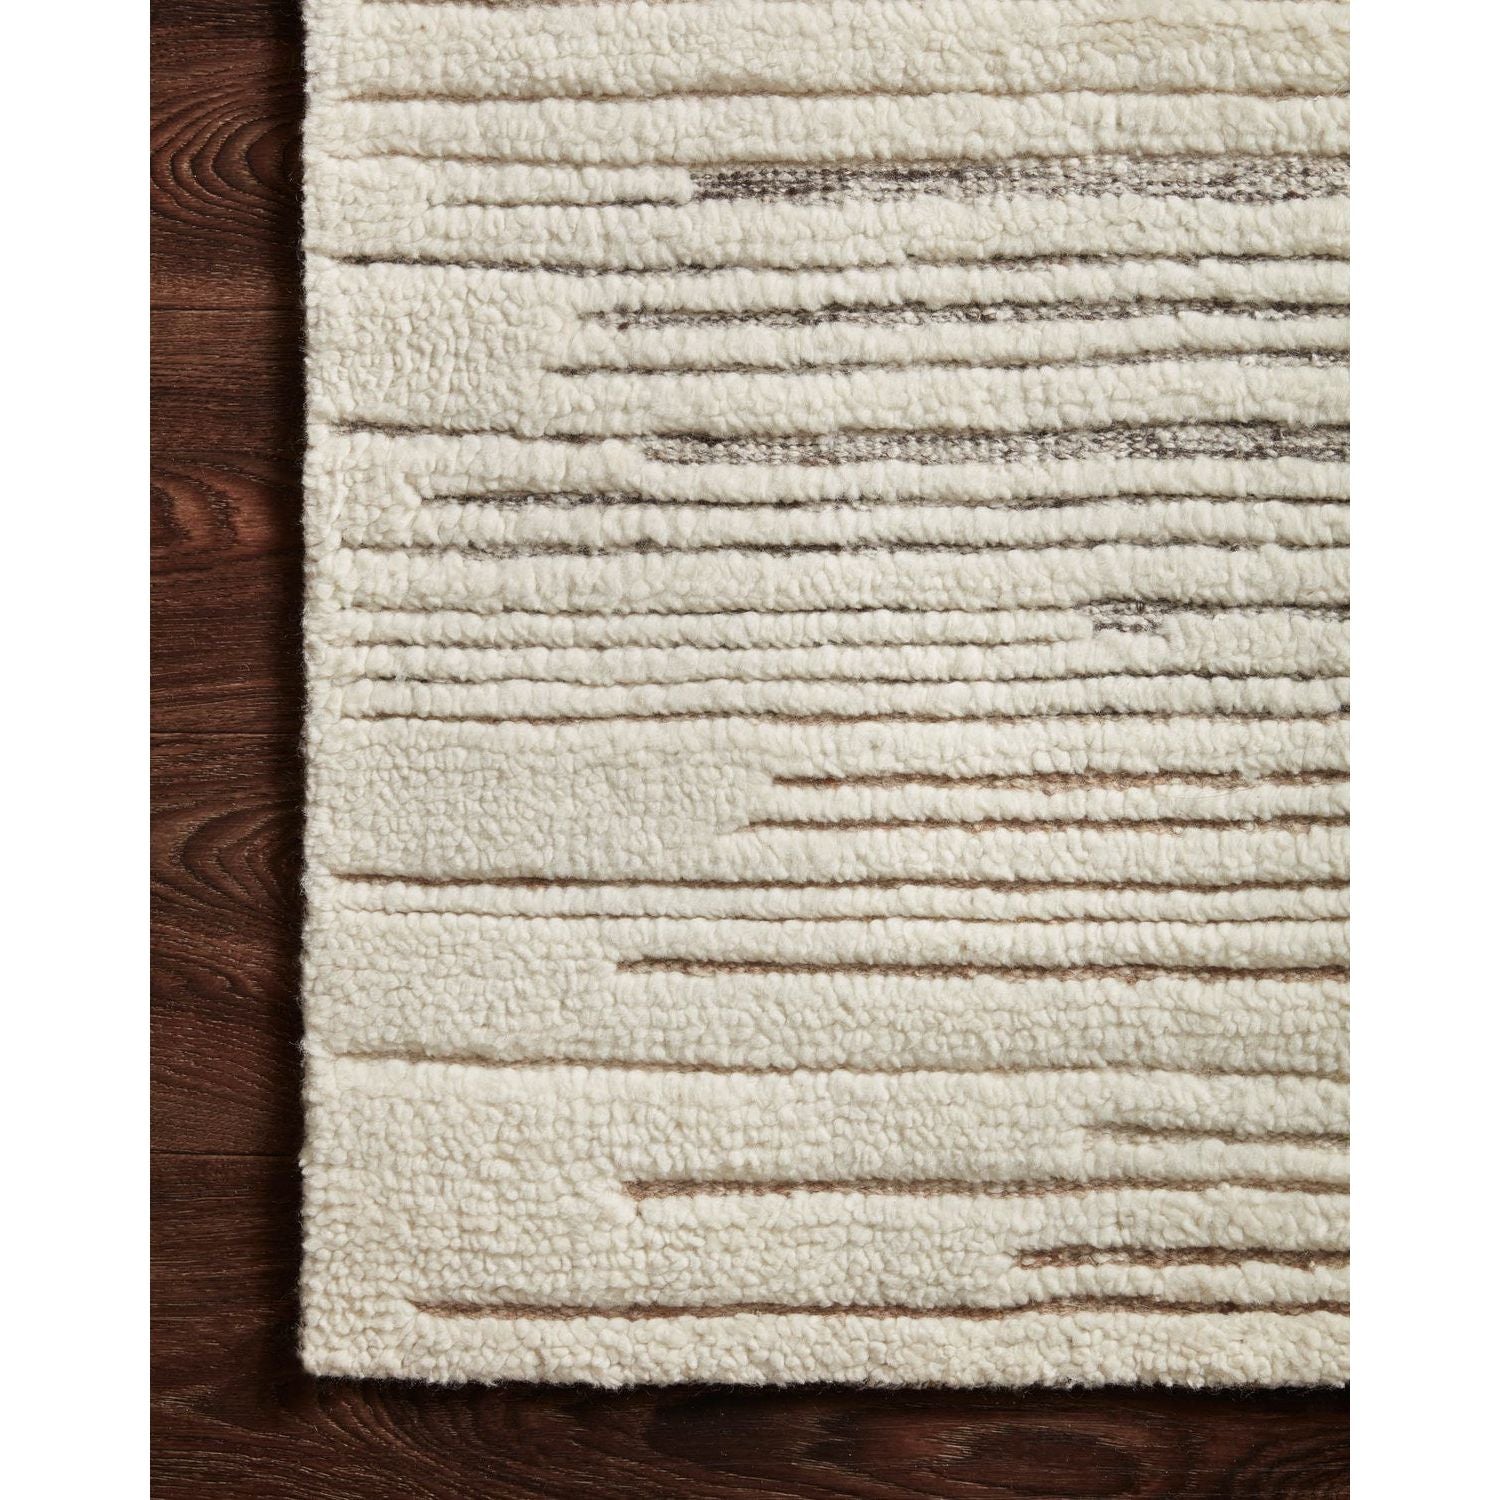 Dimensional yet soft, the Bennett Ivory / Pebble Area Rug is hand-knotted of wool, viscose and polyester in India. Featuring a new carve like high-low pile, Bennett has an ivory base with abstract tonal designs. Plus, it's plush underfoot-- a great choice for your office, bedroom, or other medium traffic areas.   Hand Knotted 45% Wool | 32% Viscose | 17% Polyester | 6% Other Fibers Pile BEN-04 Ivory/Pebble